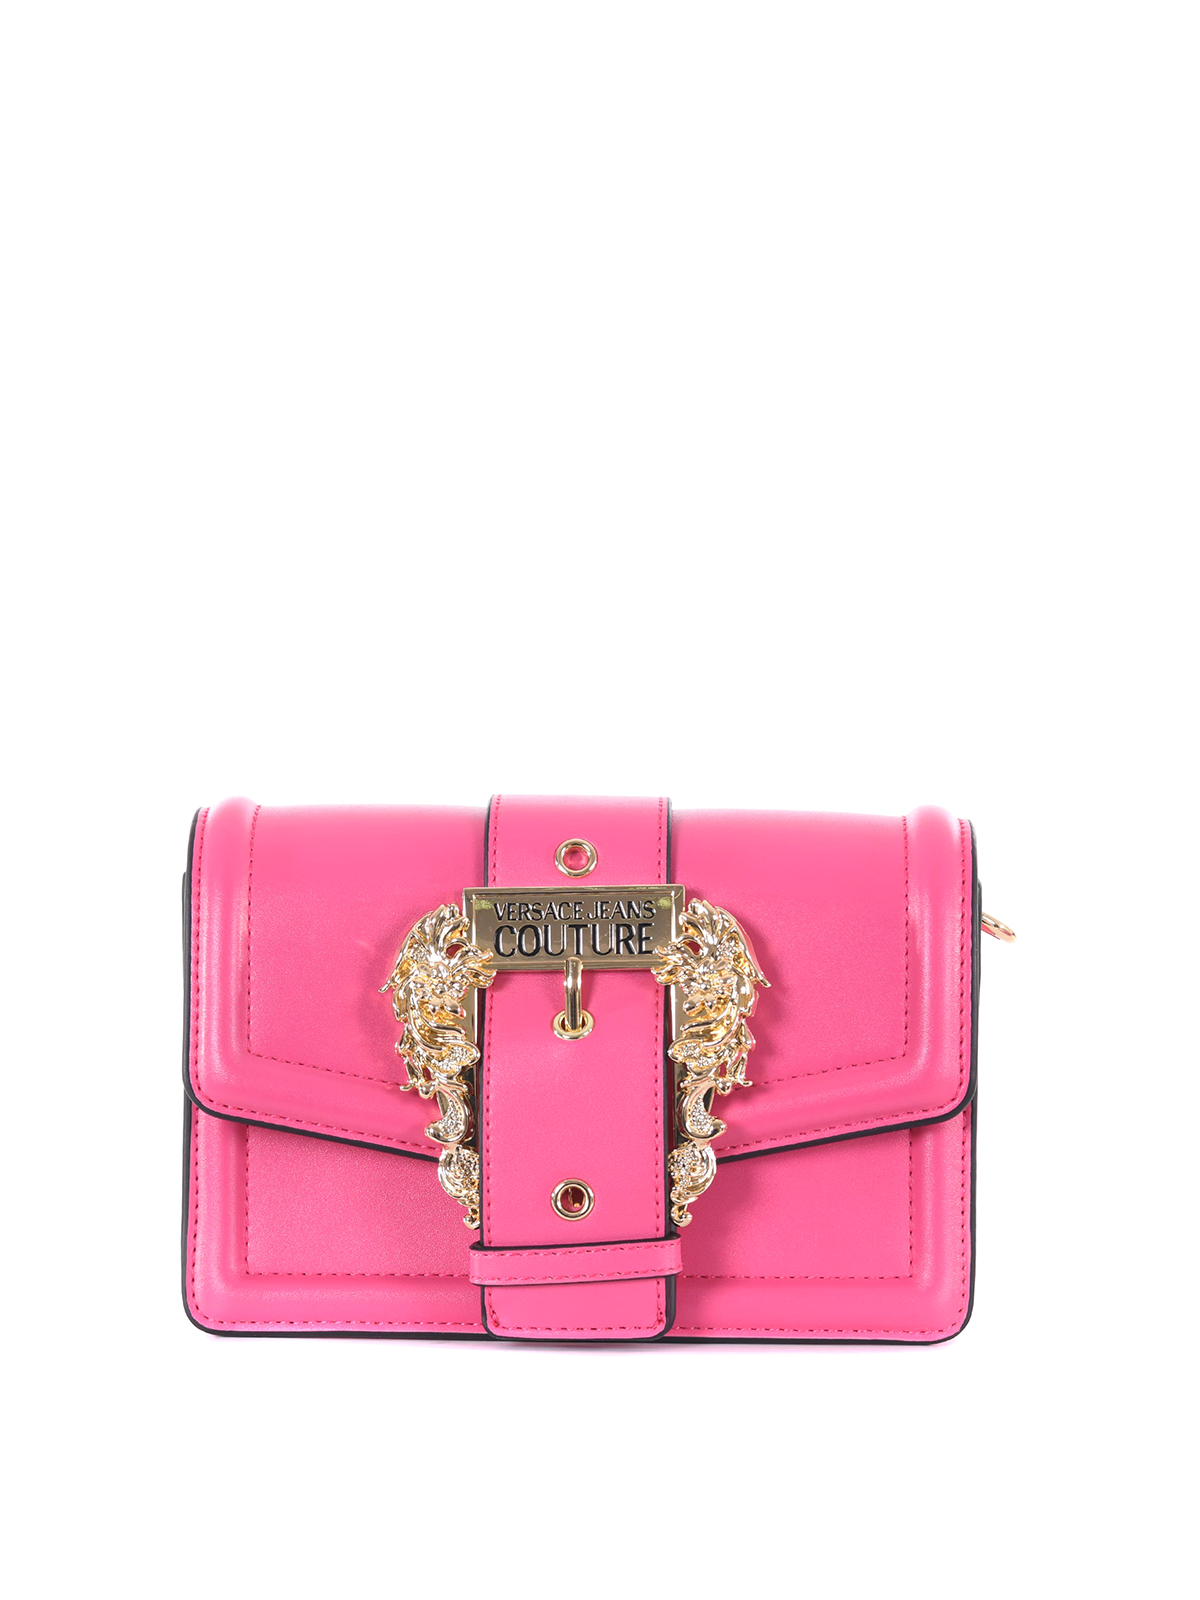 Versace Jeans Couture Bag In Multicolour